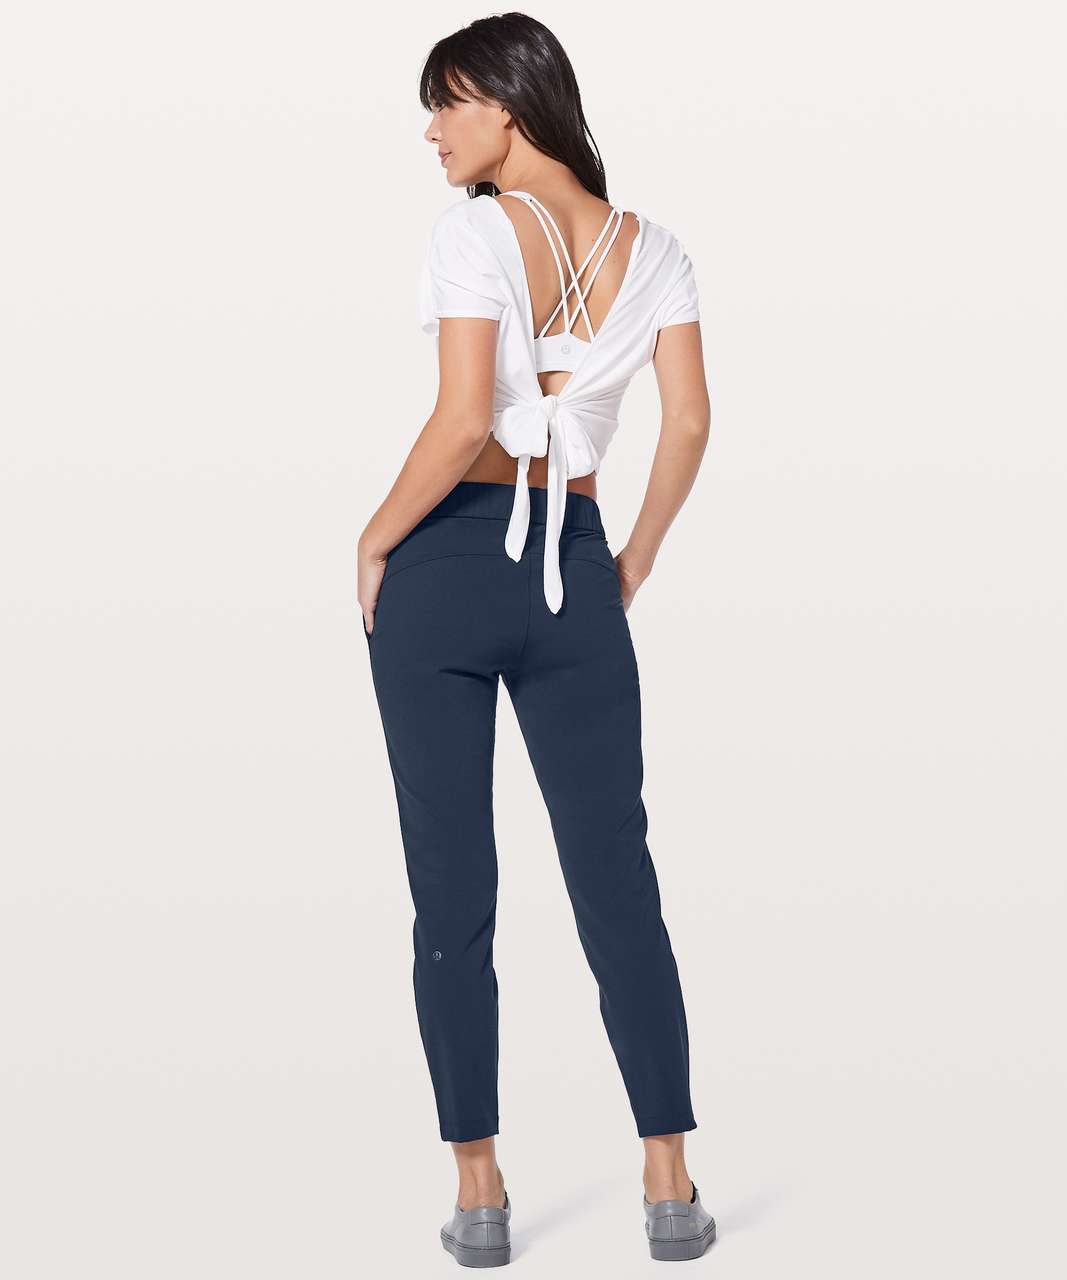 Lululemon On The Fly Pant *28" - True Navy (First Release)